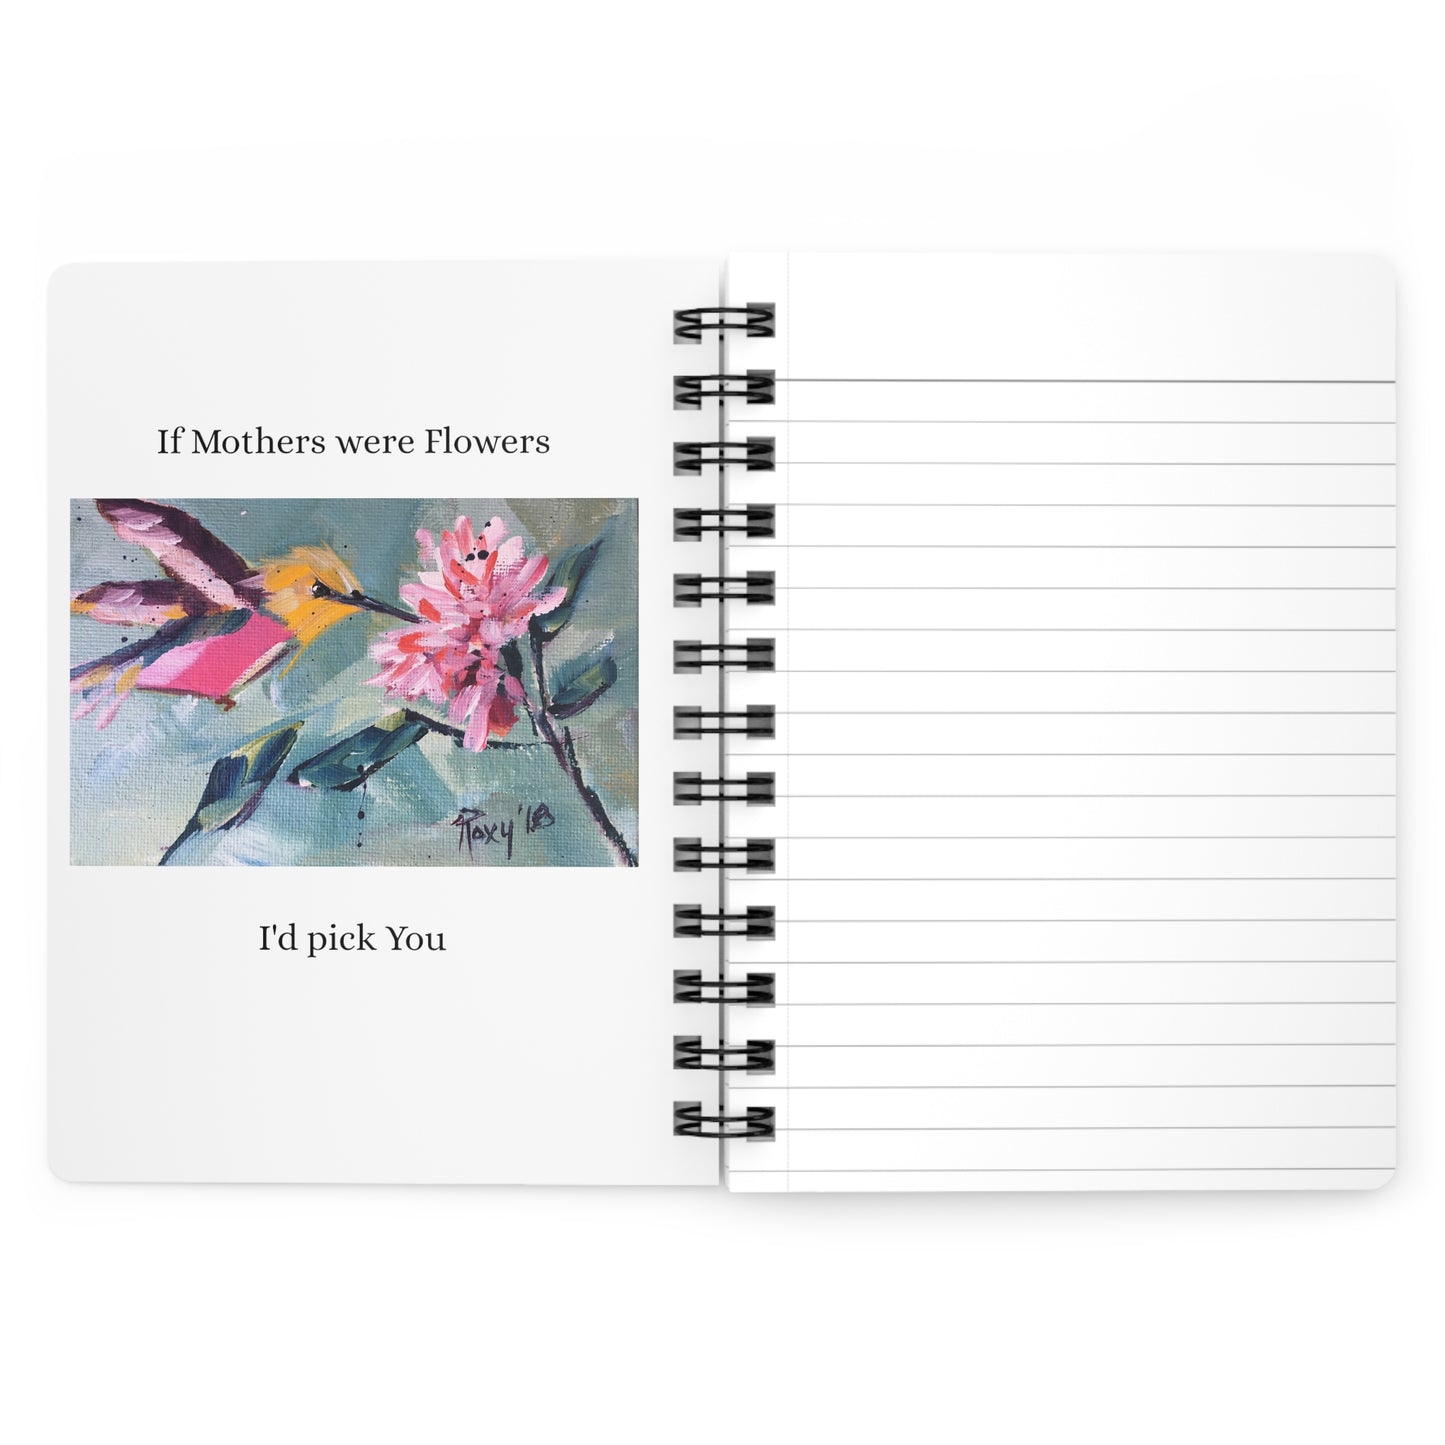 Mom- Hummingbirds-With Sentiments Spiral Bound Journal